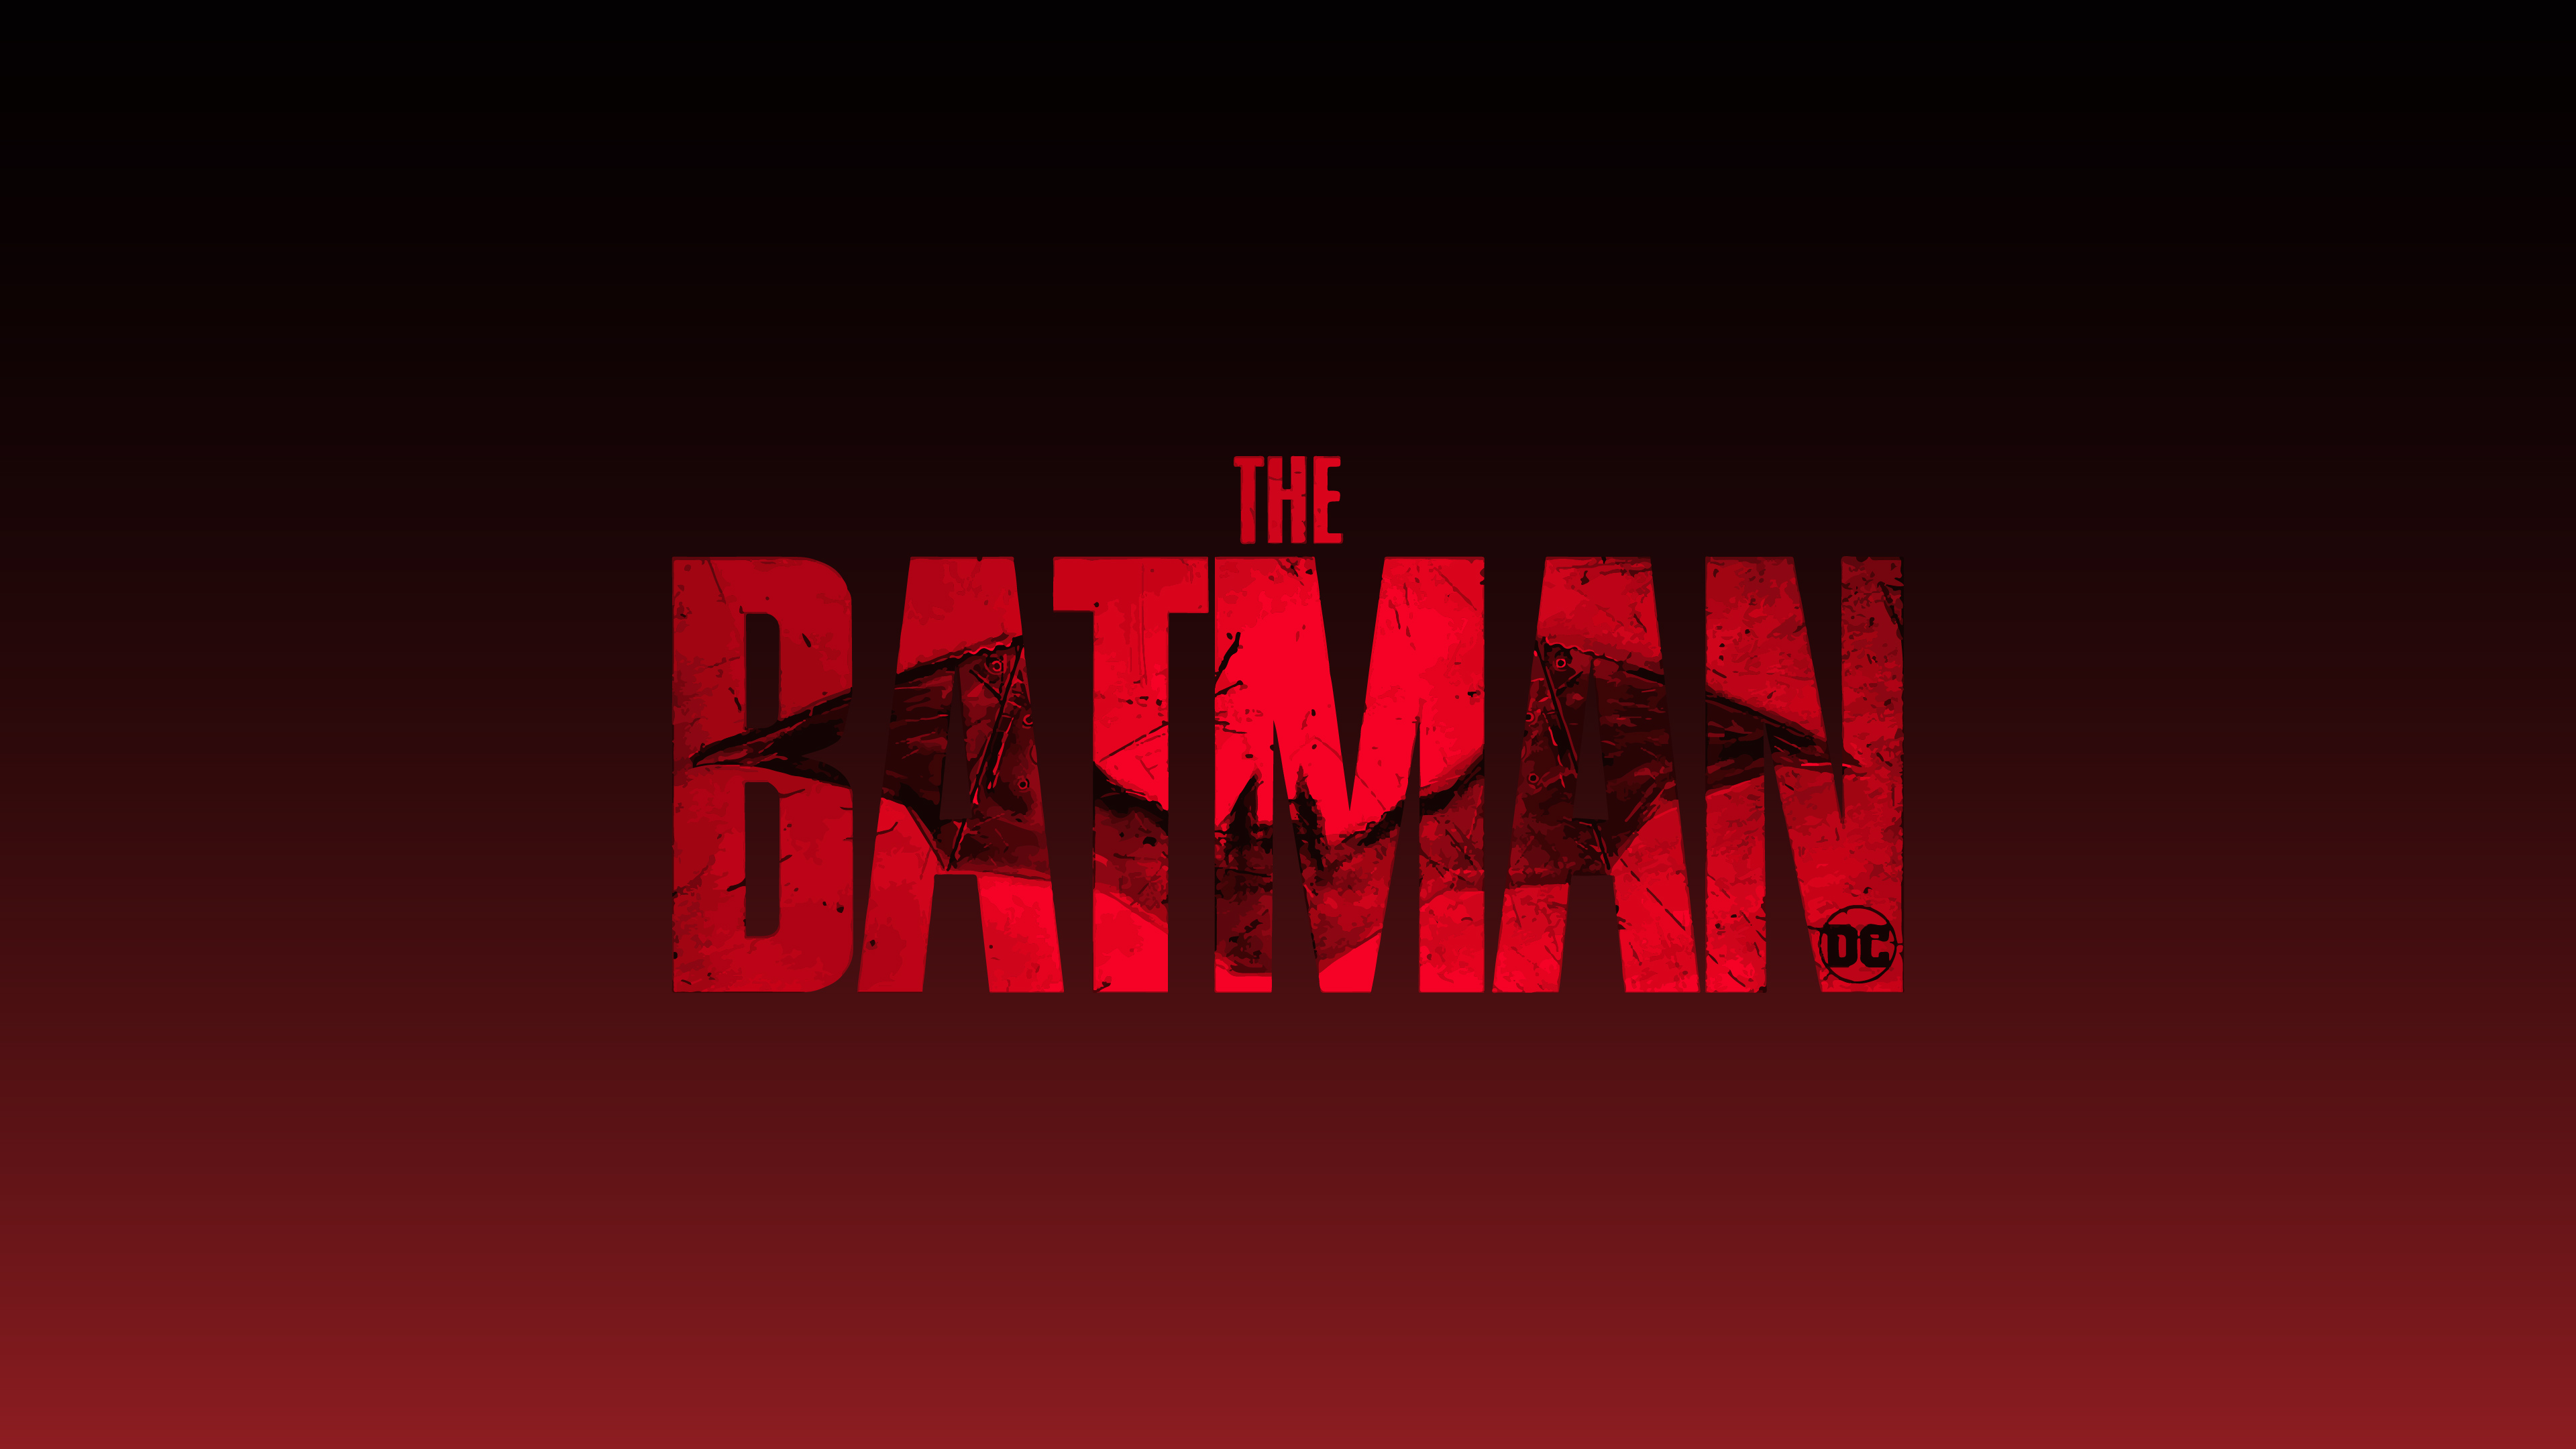 The Batman 2020 Logo 4k, HD Movies, 4k Wallpapers, Images, Backgrounds,  Photos and Pictures